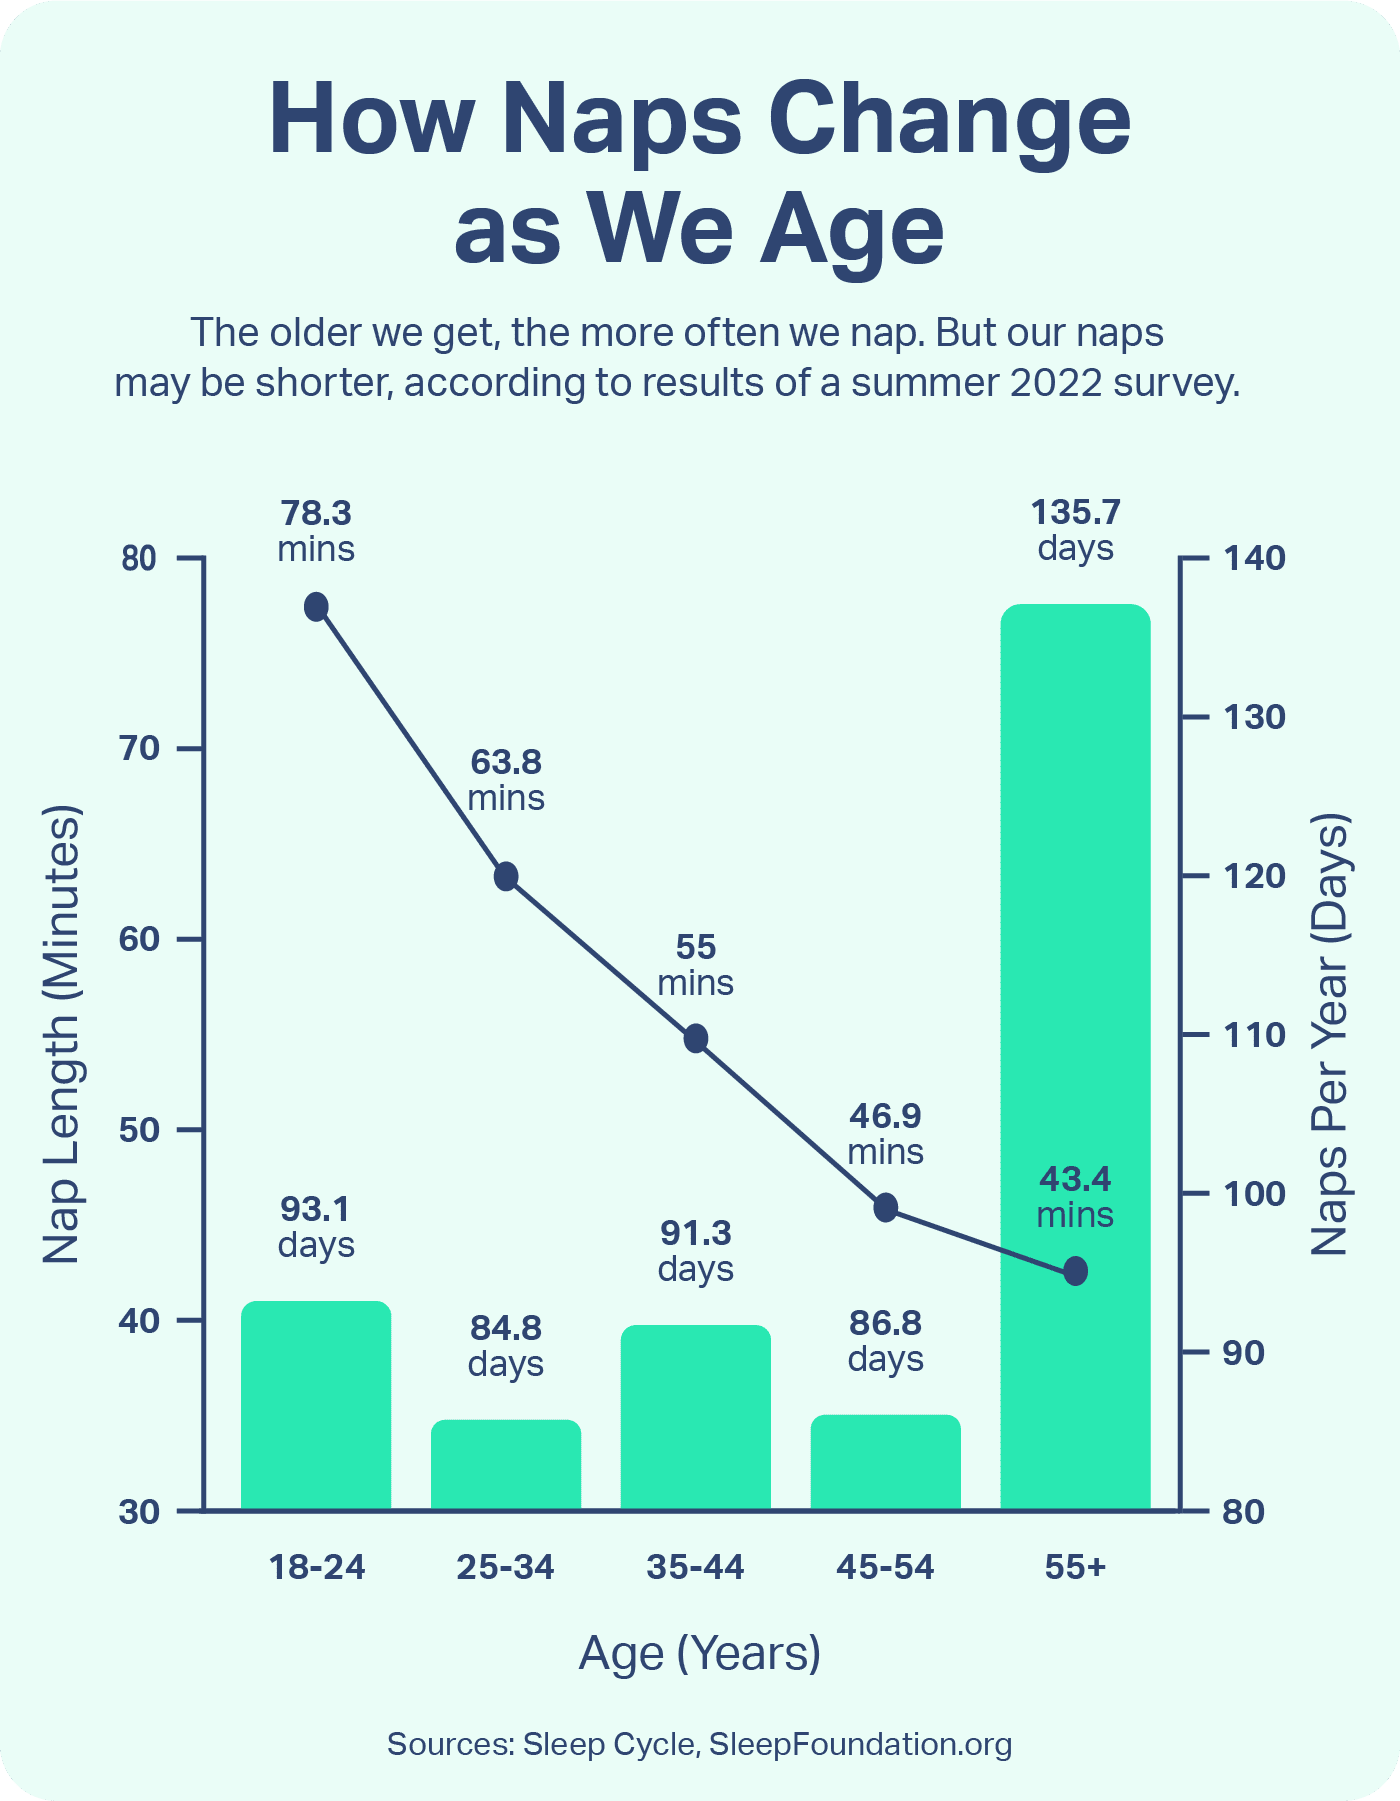 How Naps Change as We Age: Mobile